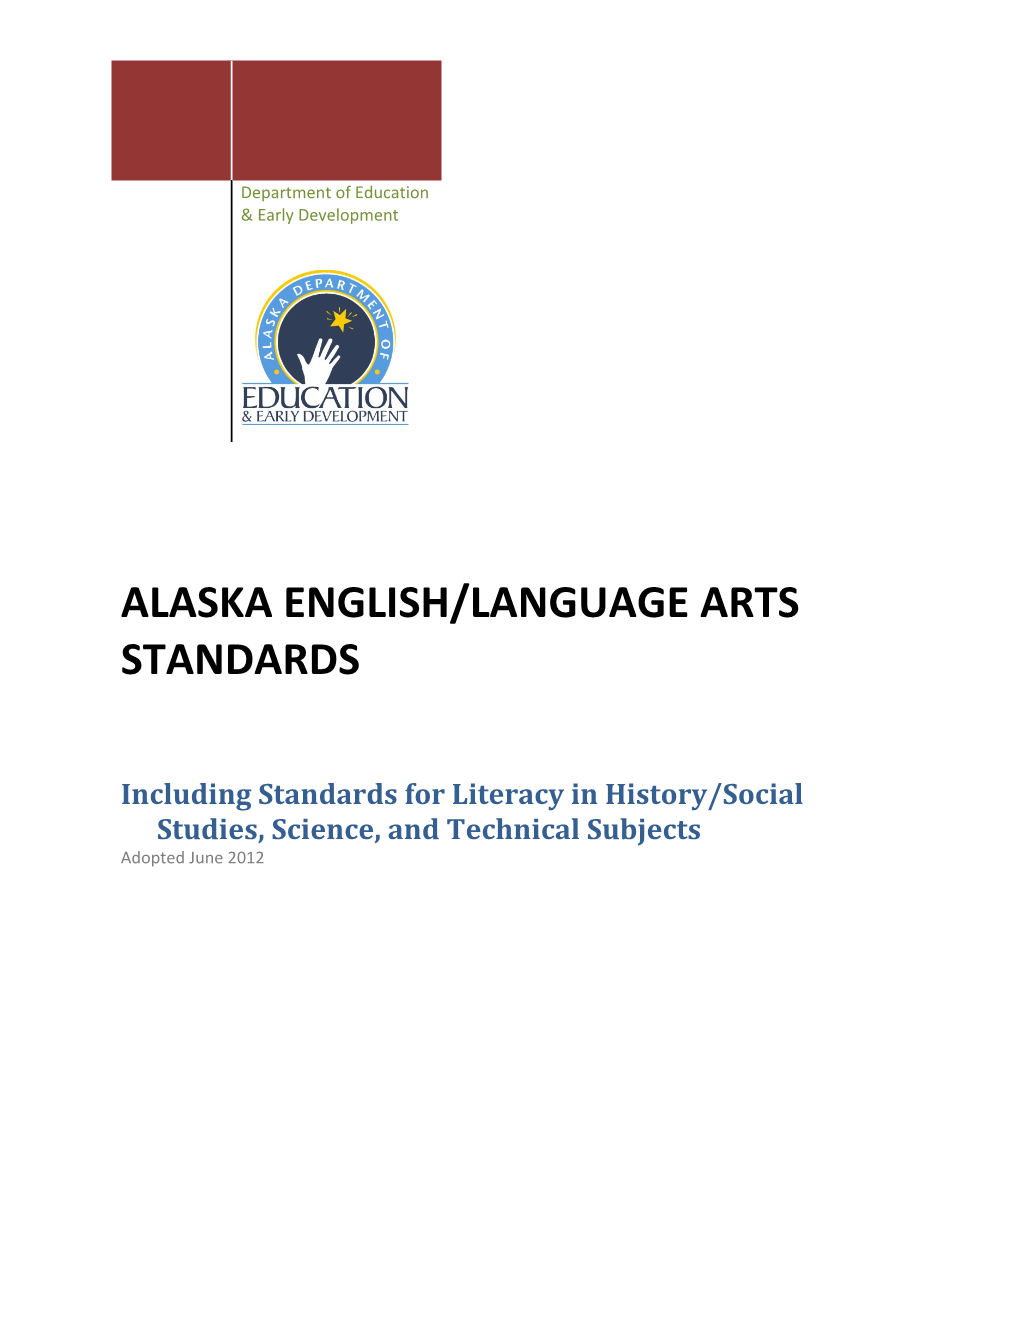 Including Standards for Literacy in History/Social Studies, Science, and Technical Subjects